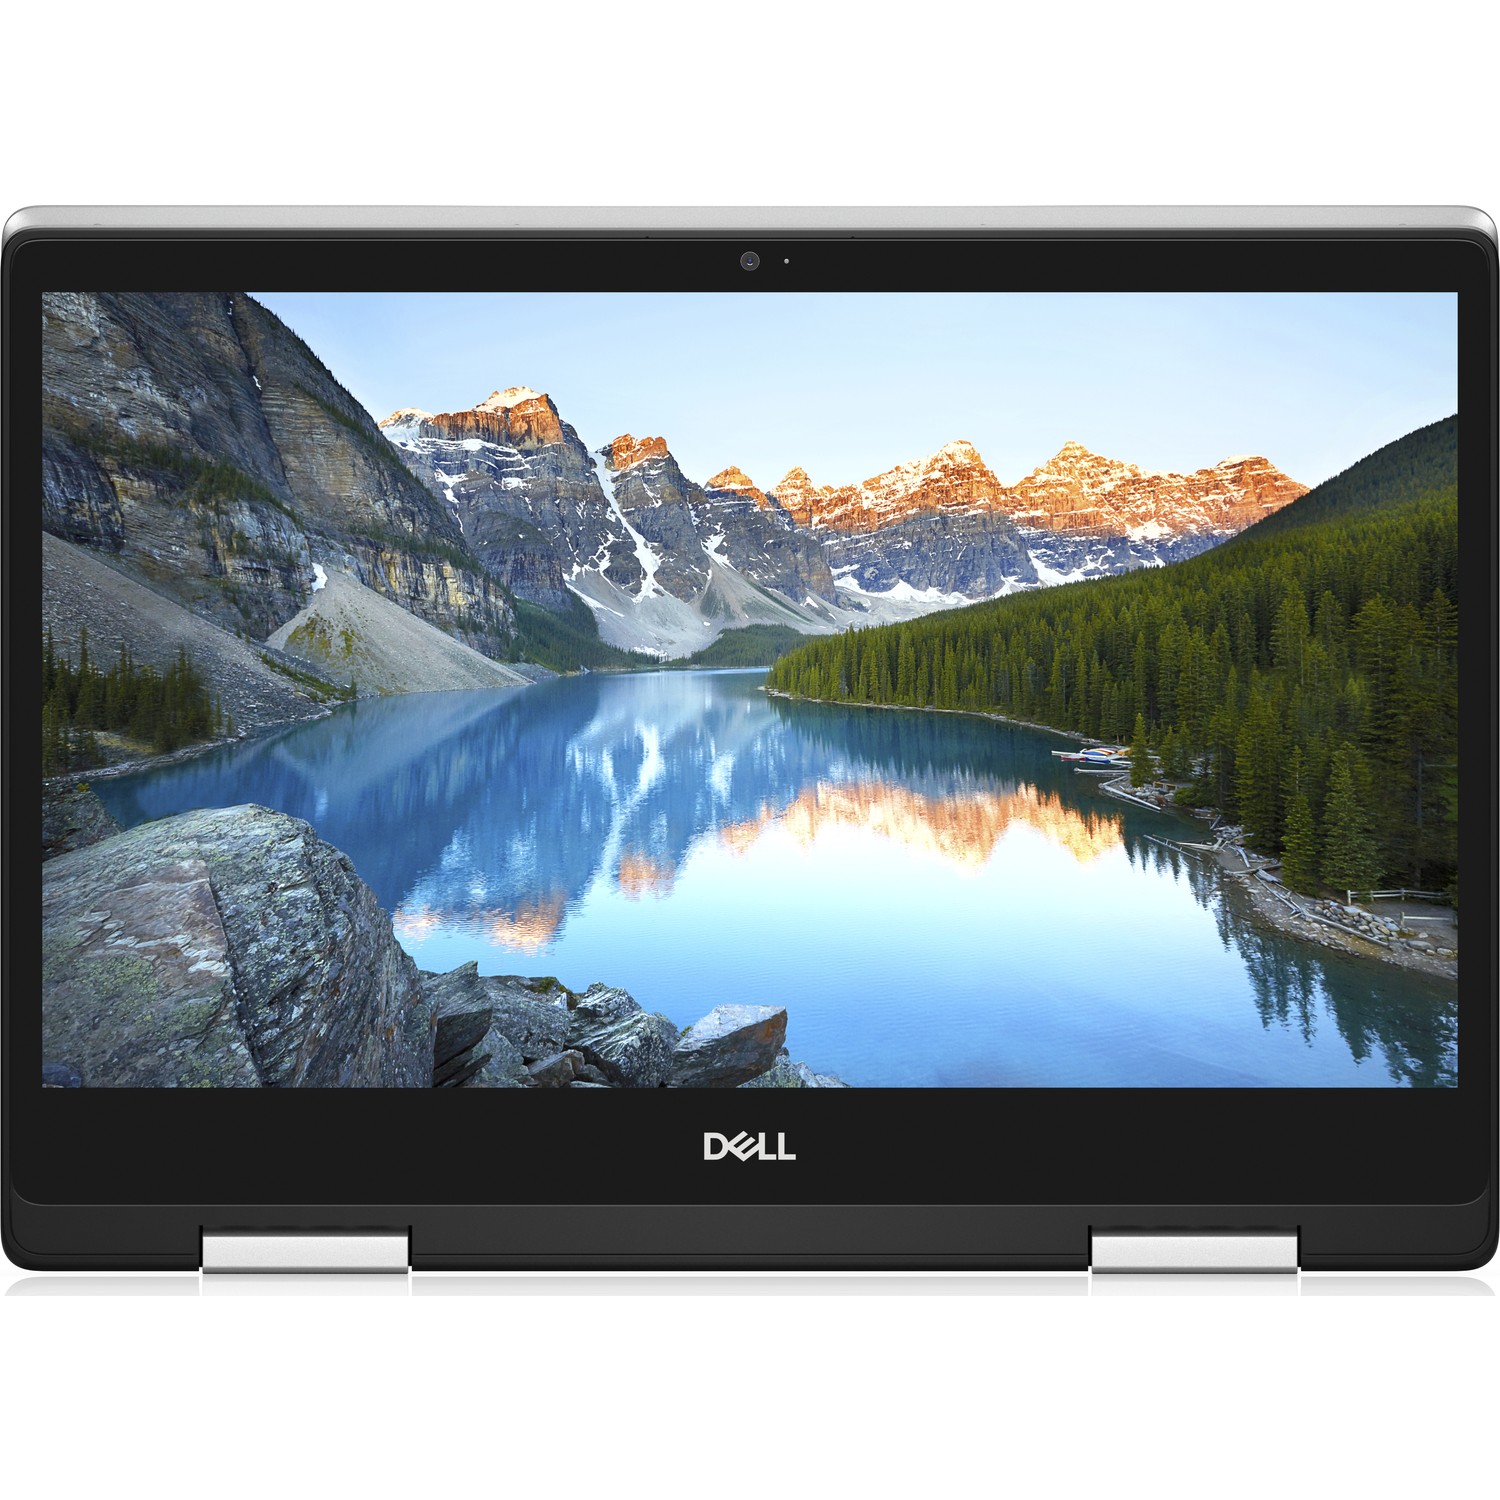 DELL INSPIRON 5482-FHDTS56W82C I7-8650U 8GB 256GB SSD 2GB MX130 14" FHD IPS TOUCH WIN10 NOTEBOOK